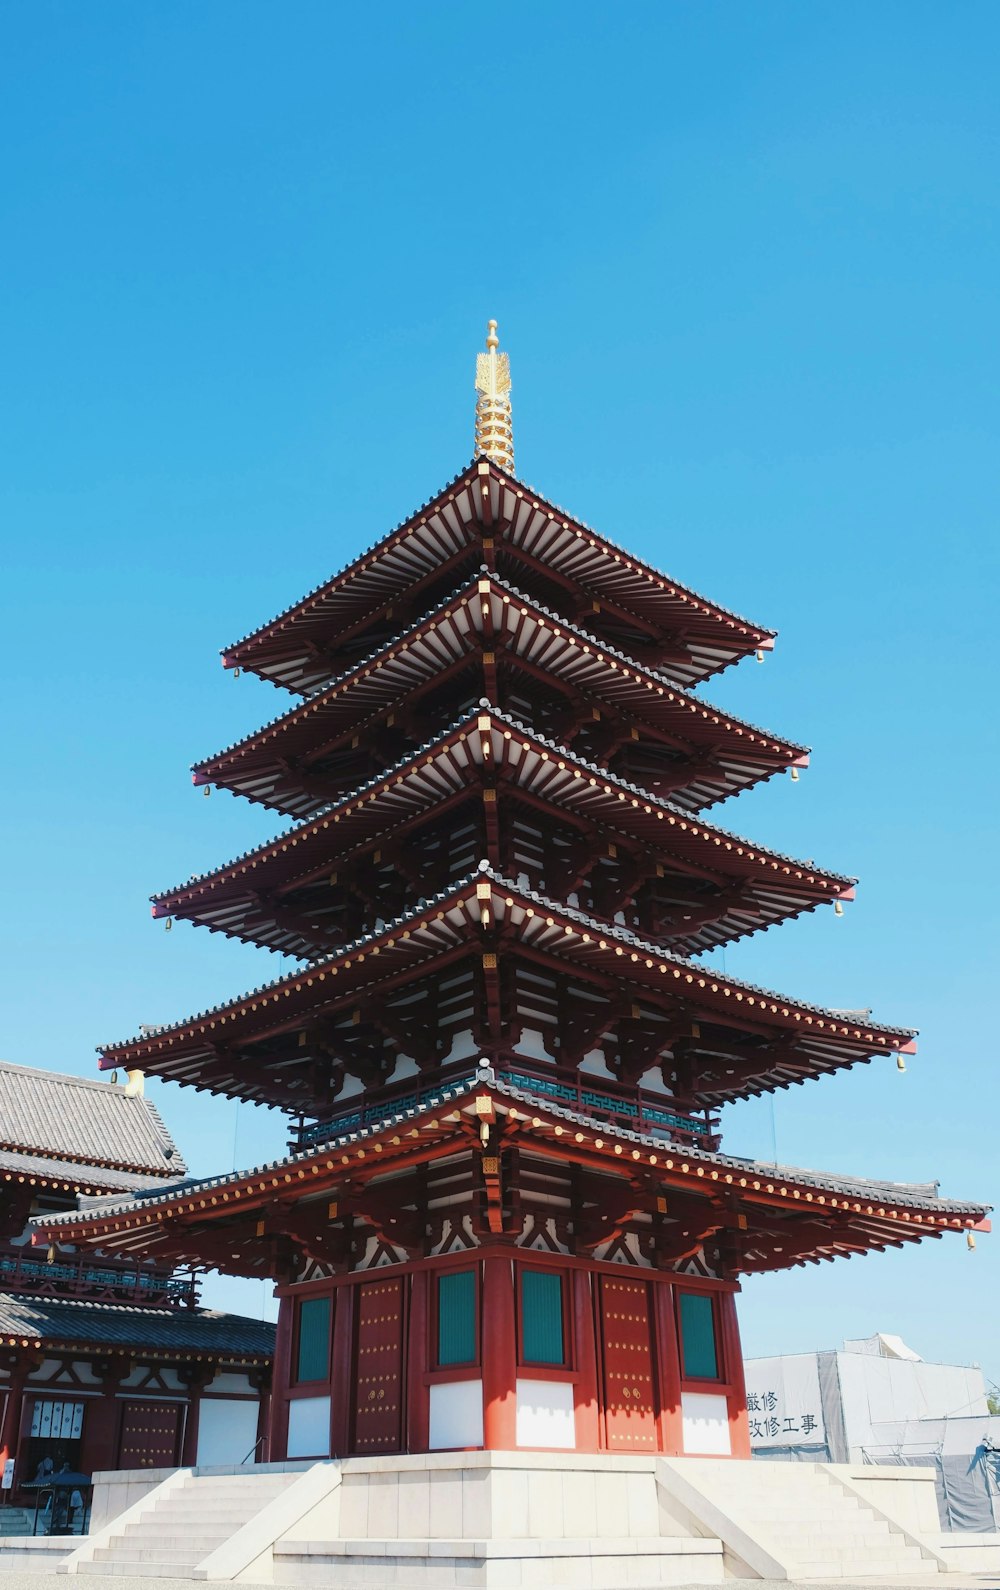 black pagoda temple under blue sky during daytime